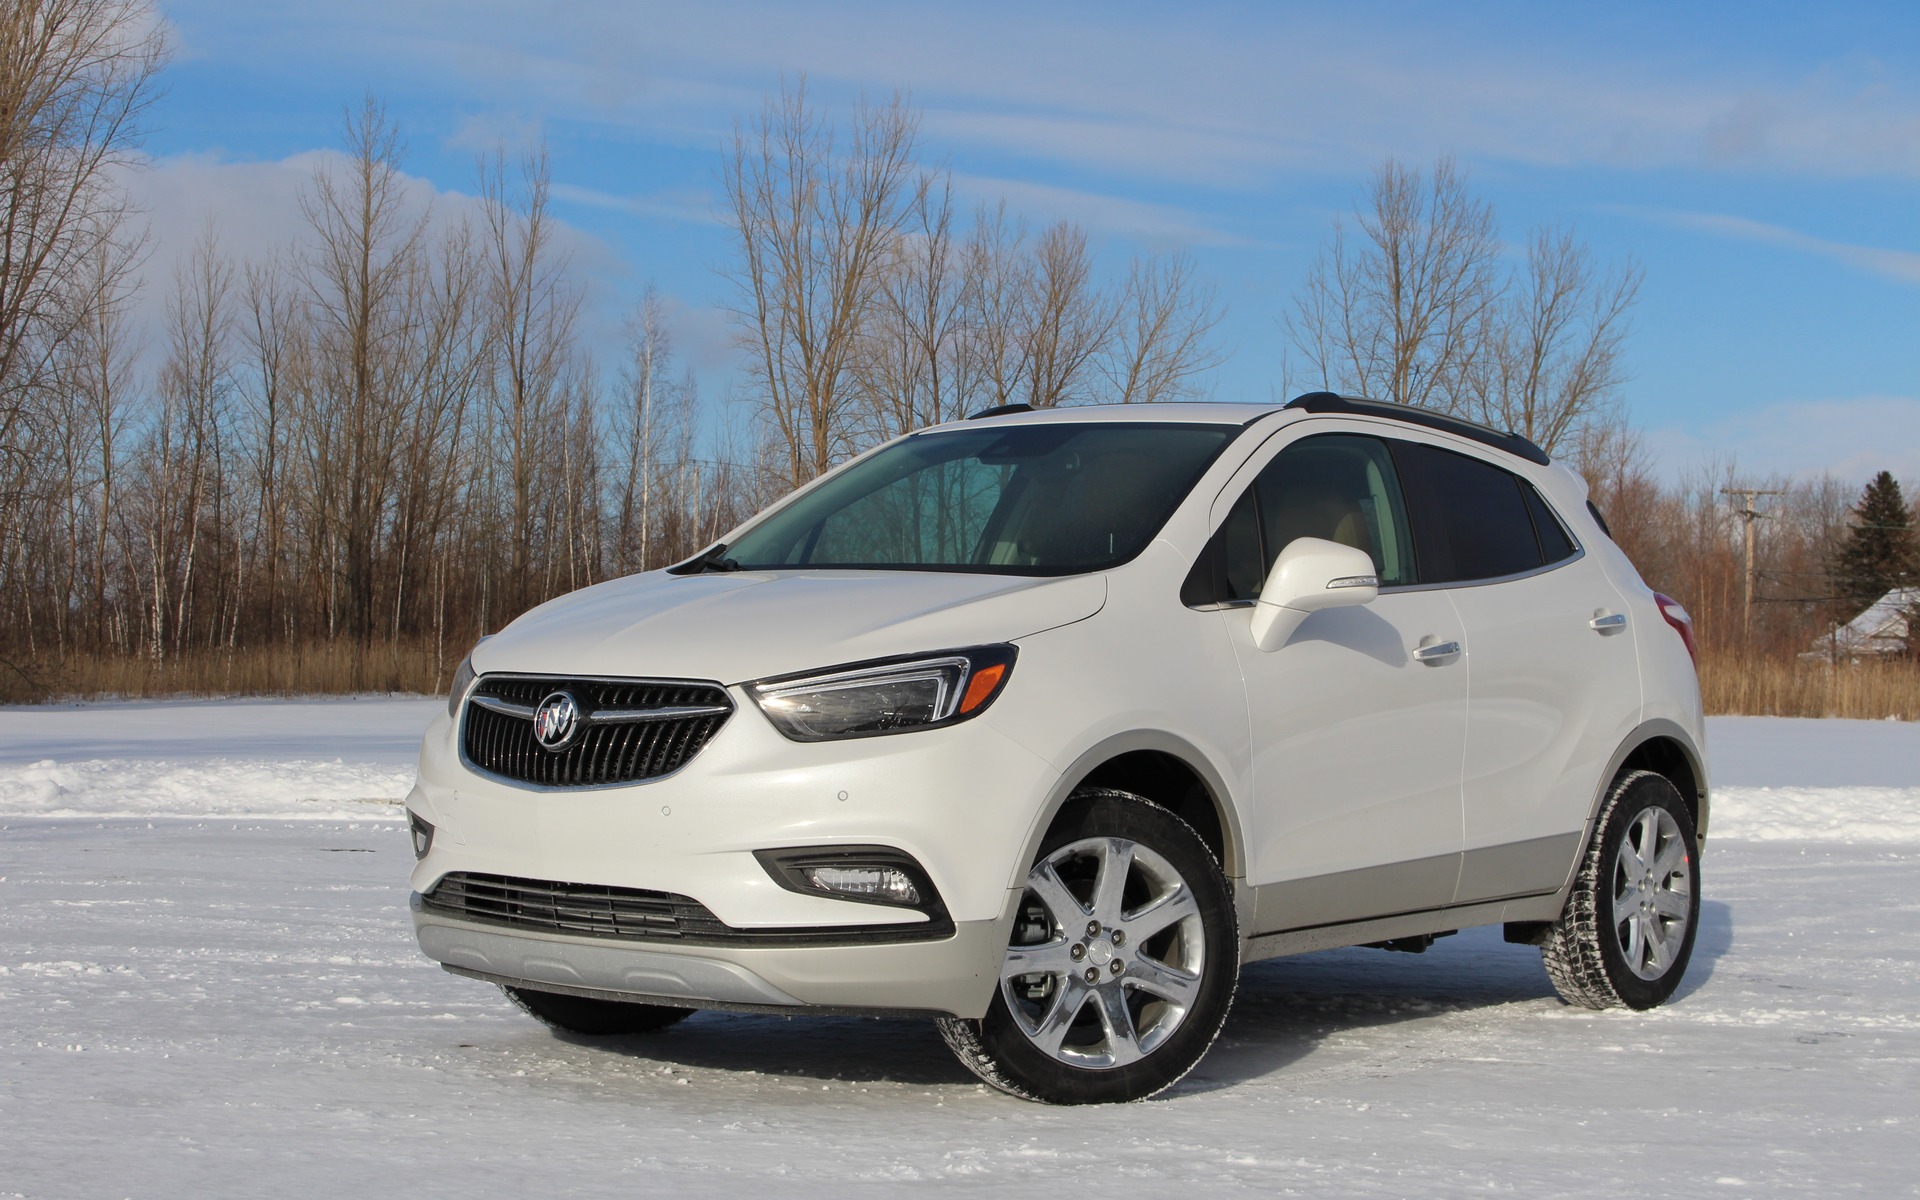 2017 Buick Encore: Time Doesn't Stand Still - The Car Guide